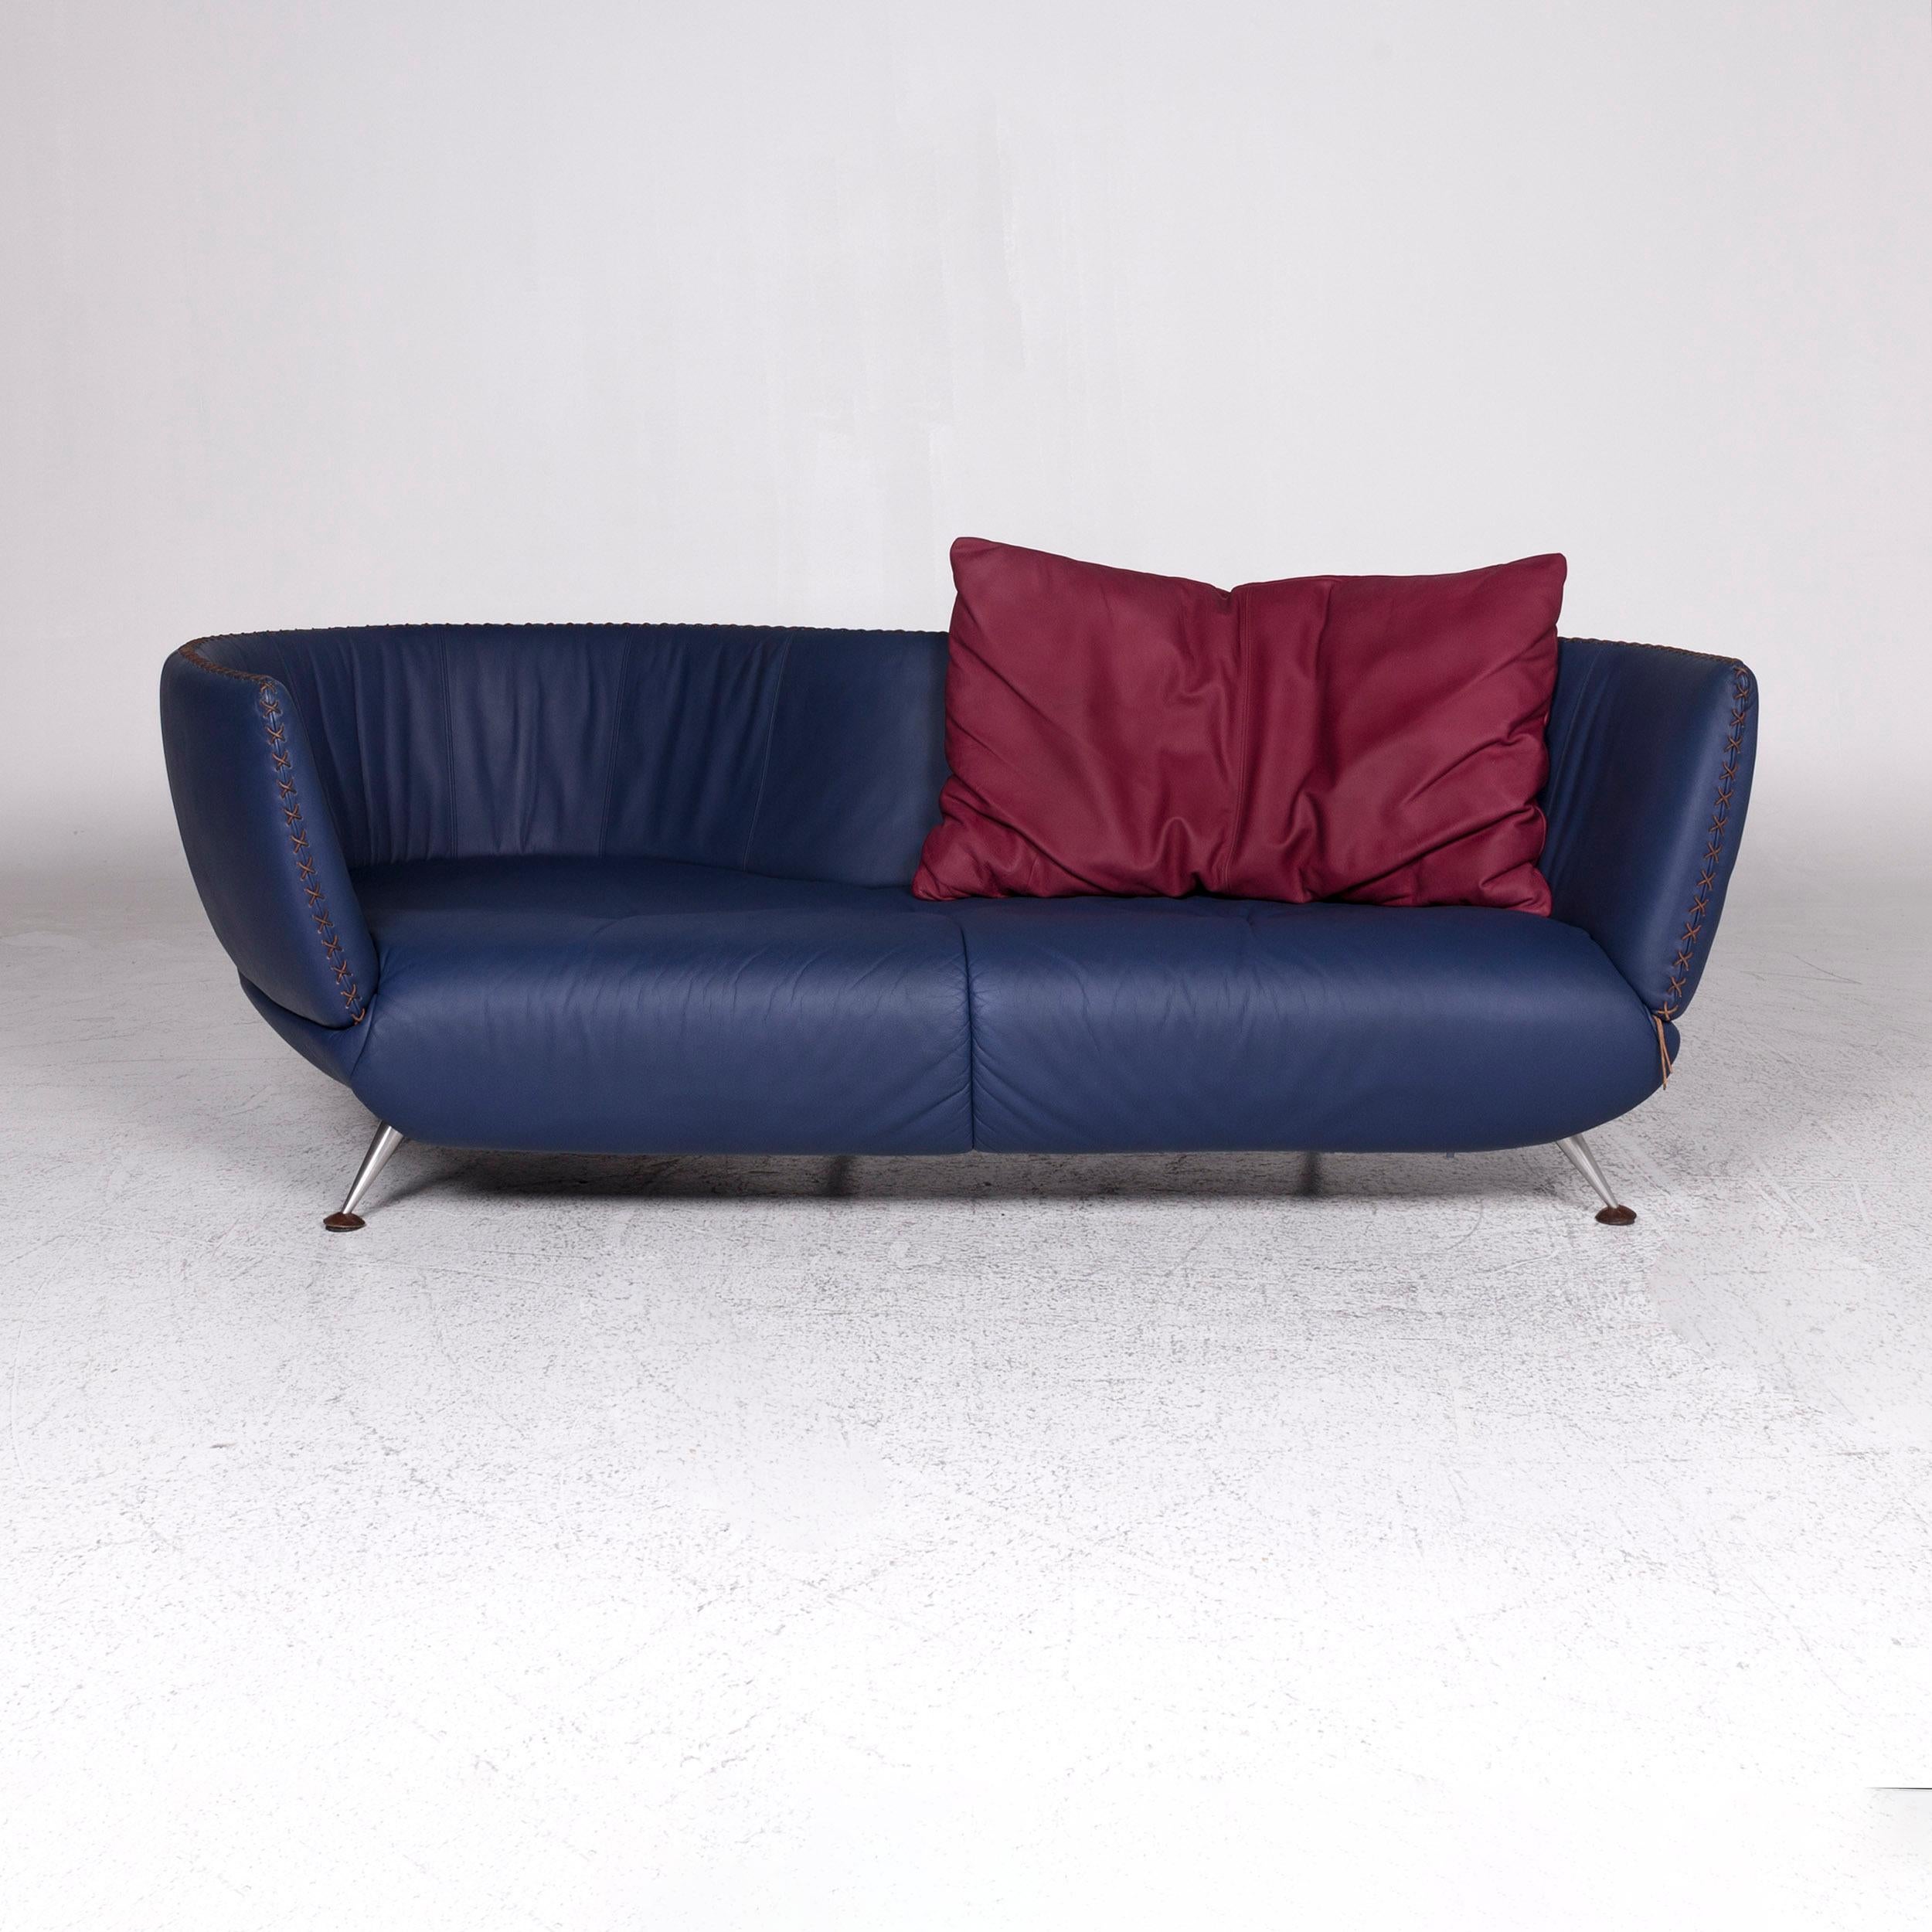 We bring to you a De Sede DS 102 leather sofa blue three-seat couch.
 
 Product measurements in centimeters:
 
 depth 94
 width 226
 height 75
 seat-height 40
 rest-height 75
 seat-depth 75
 seat-width 173
 back-height 37.

   